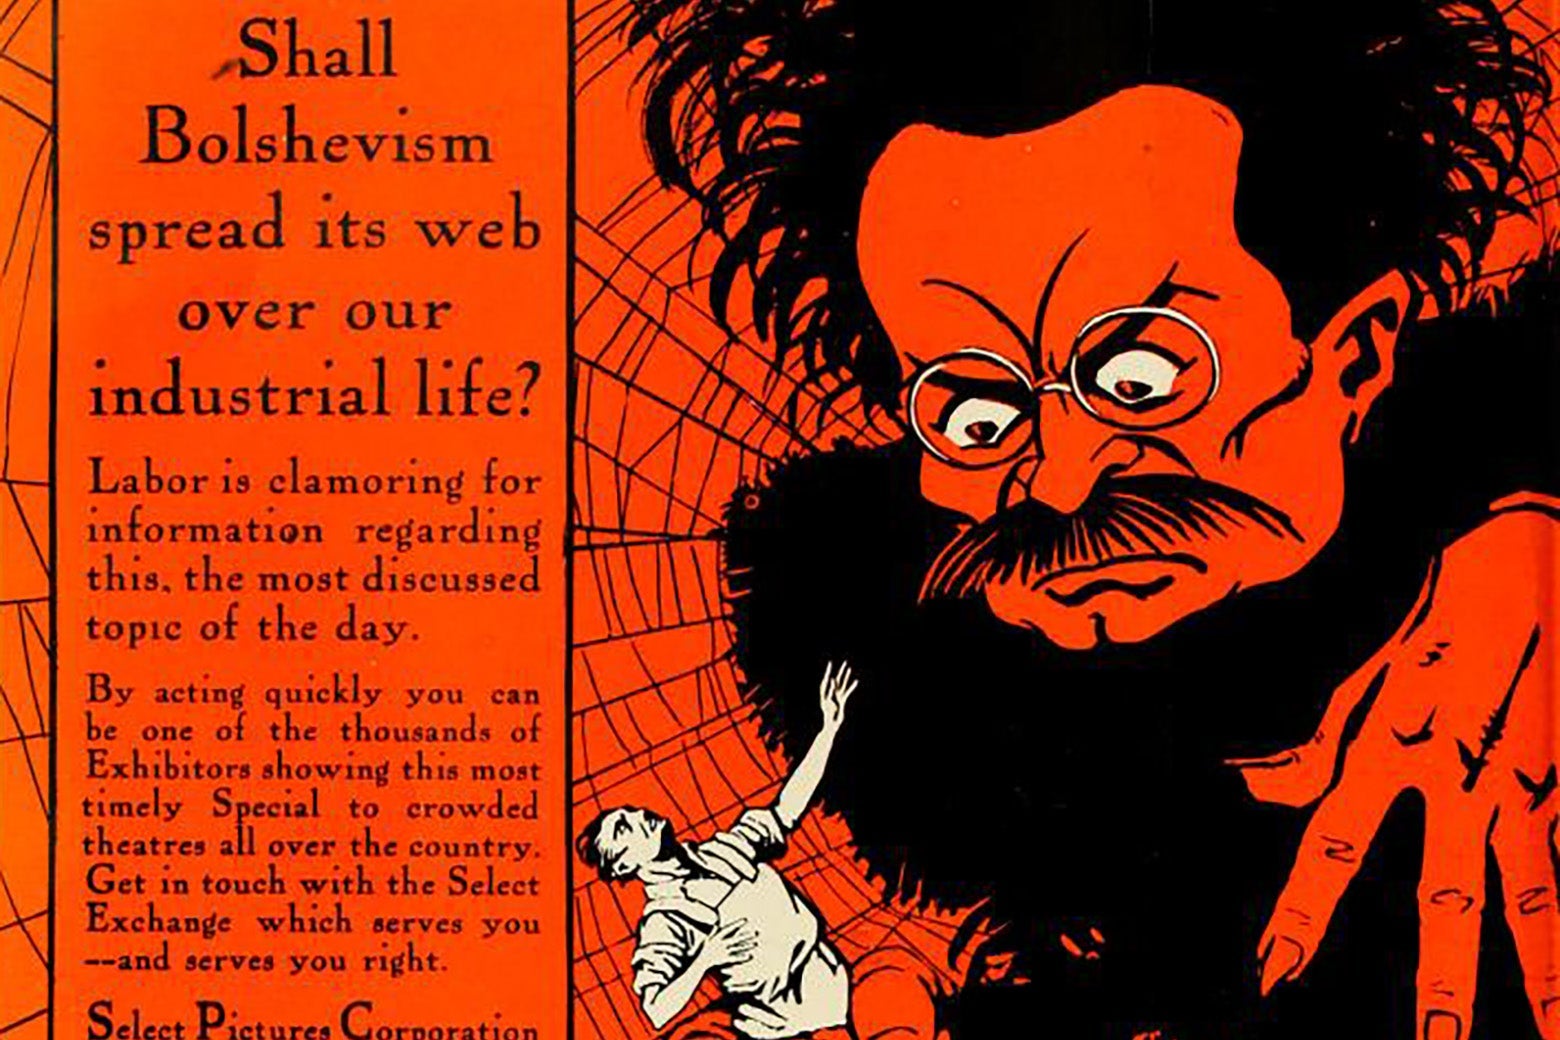 A magazine ad for Bolshevism on Trial, showing a Bolshevik trapping a worker in his web of deceit.